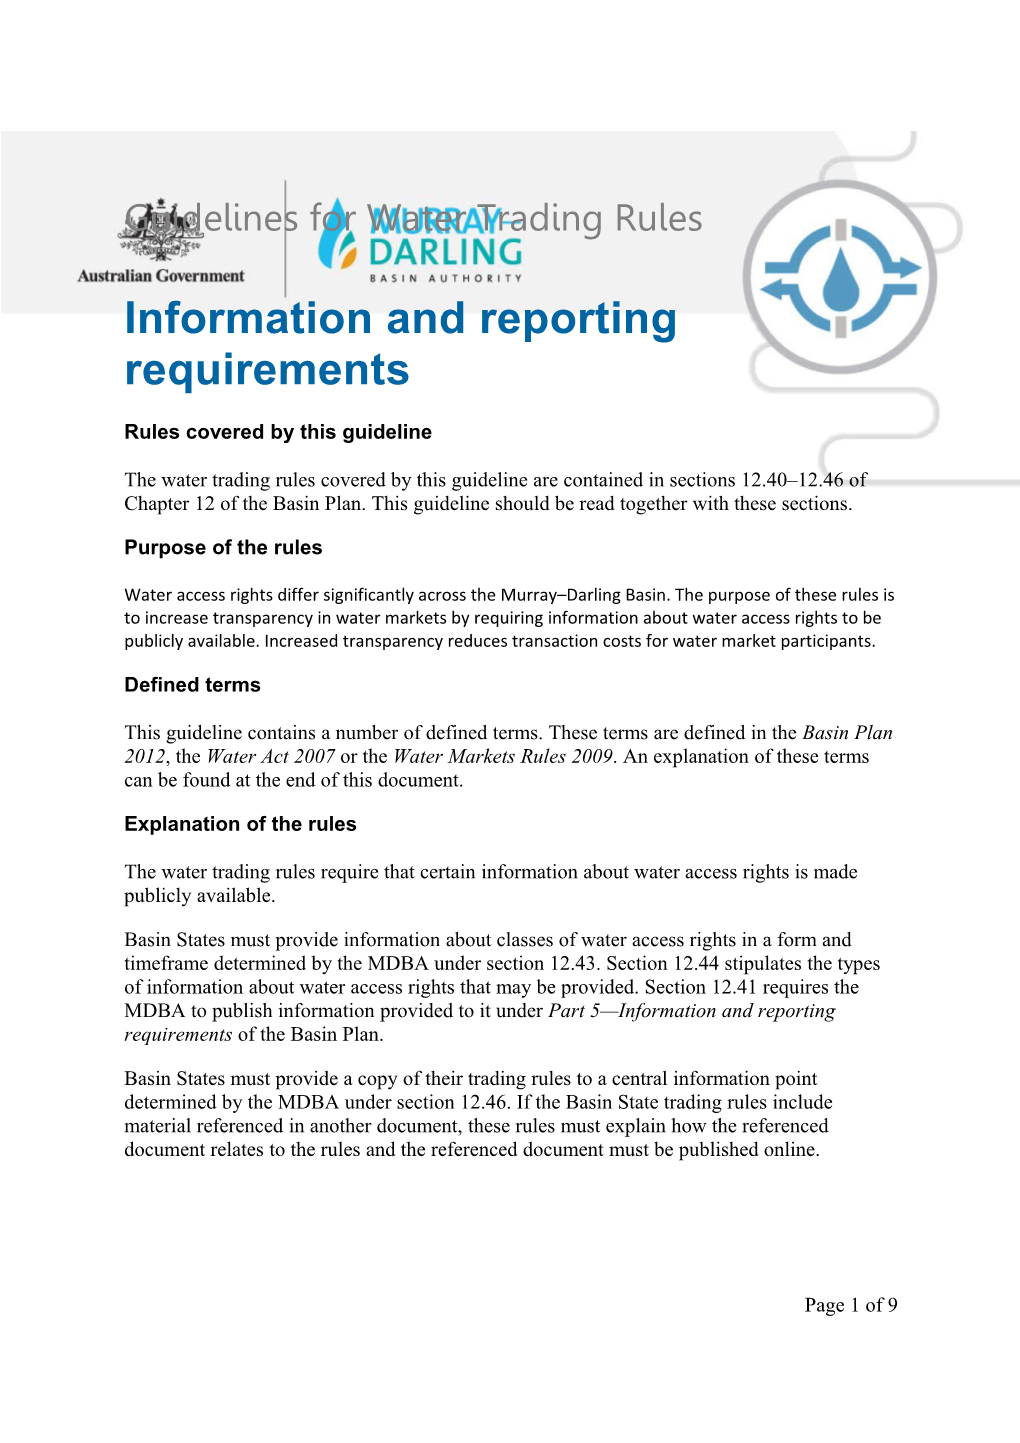 Water Trading Guidelines - Information and Reporting Requirements